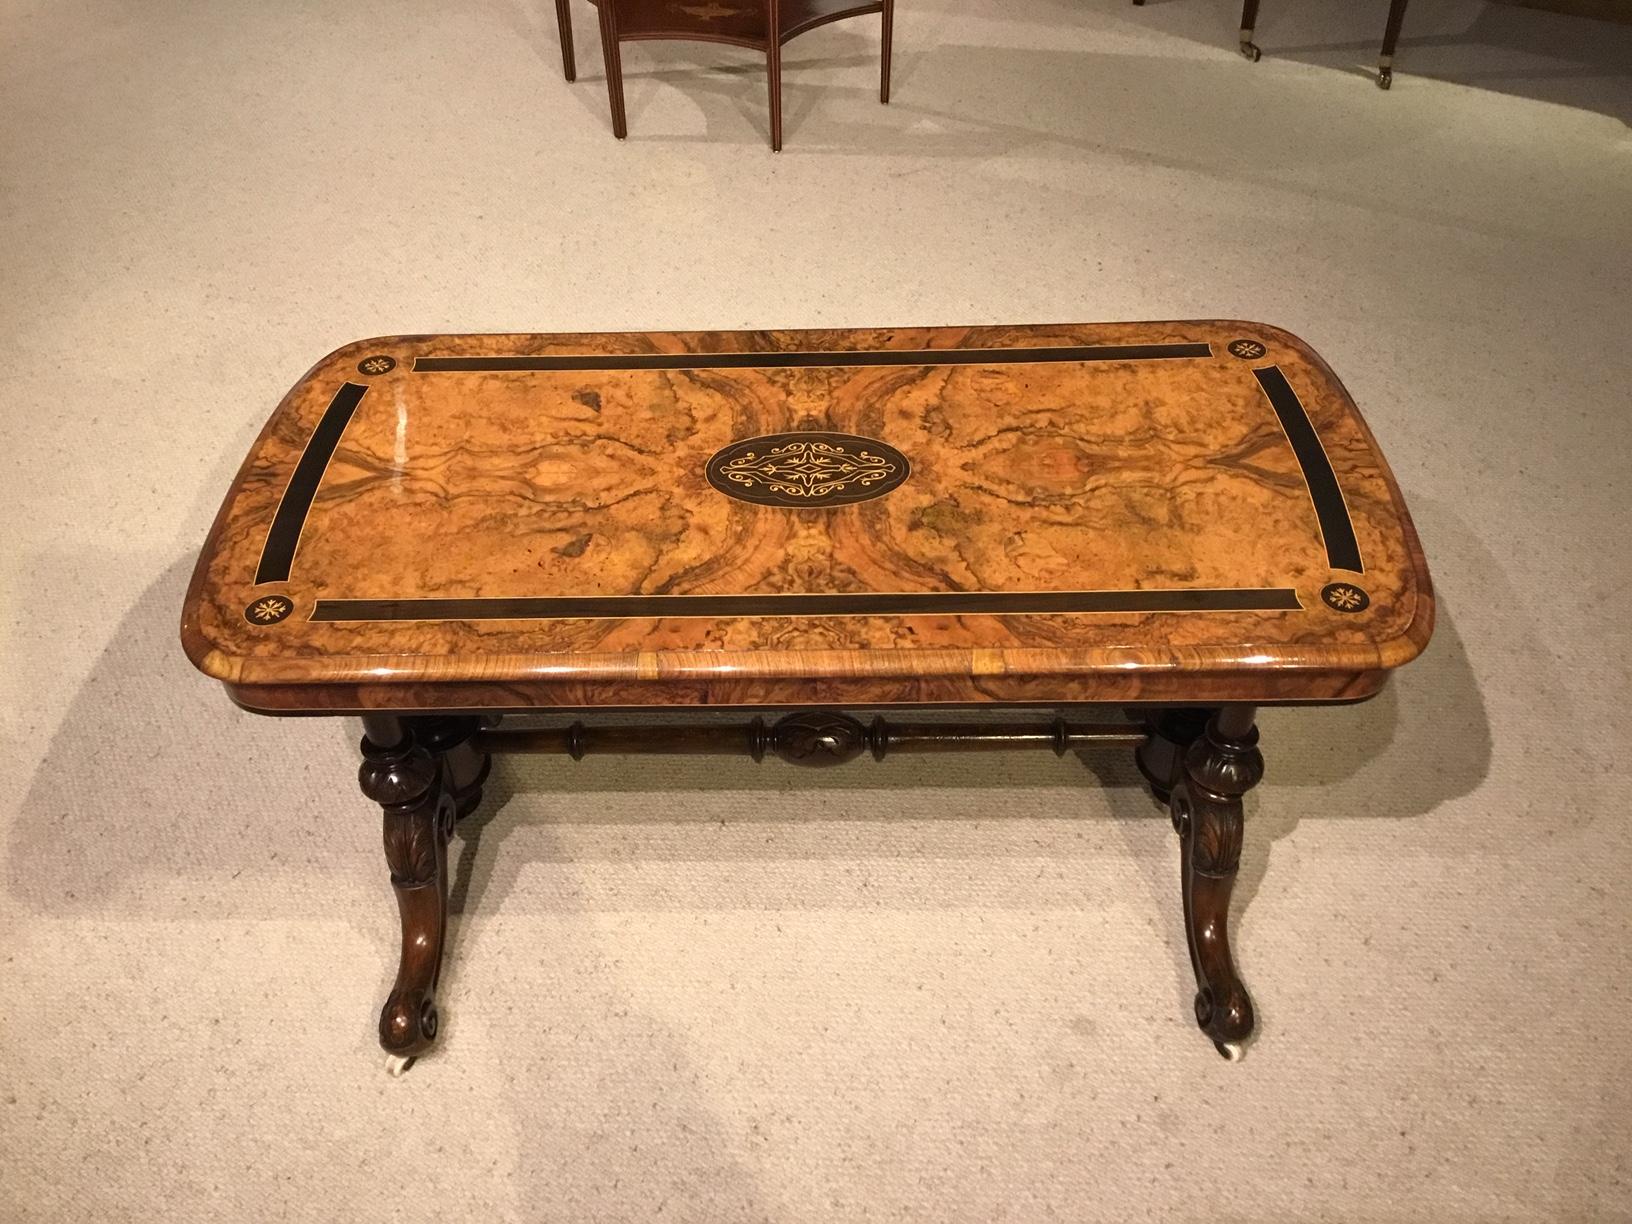 A Victorian Period burr walnut & ebony inlaid antique coffee table. Having a rectangular top with rounded corners veneered in beautifully figured burr walnut with an ebony inlaid border and central marquetry panel. Supported on four turned and